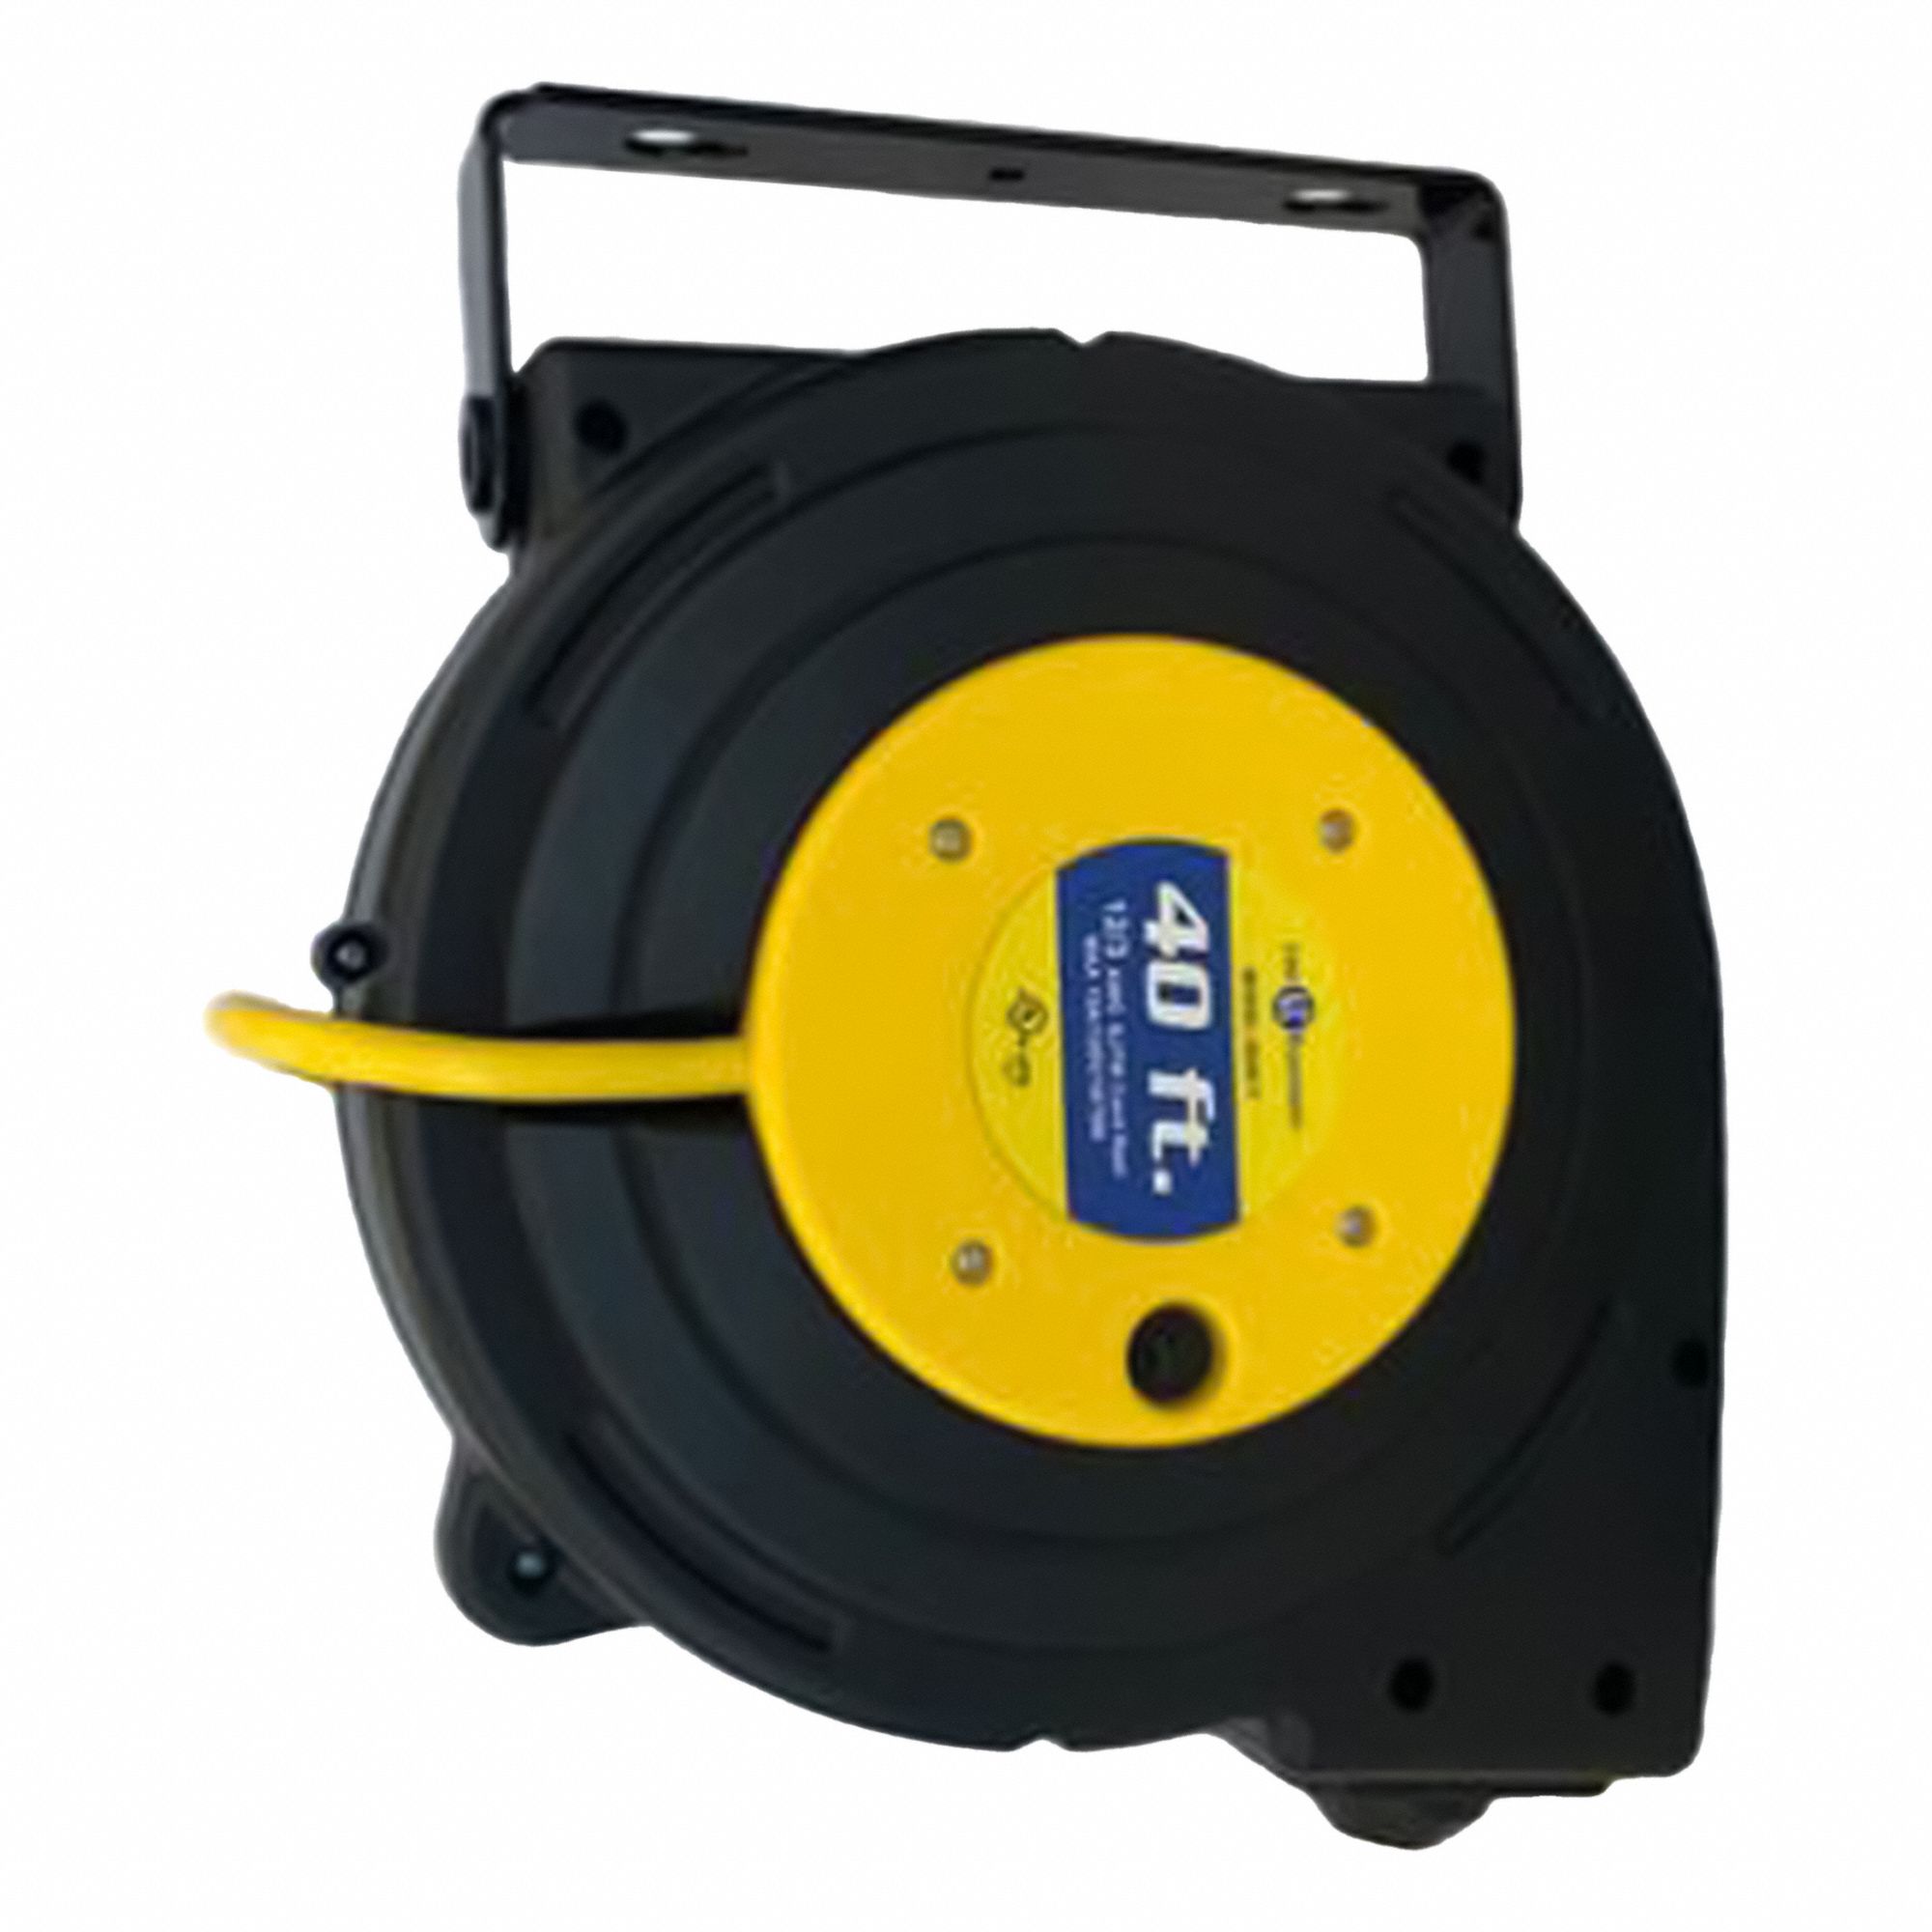 LIND EQUIPMENT CORD REEL, 12/3, 3 OUTLETS, 15 A, 40 FT LENGTH, SJTW - Self-Retracting  Cord Reels - LND8040T